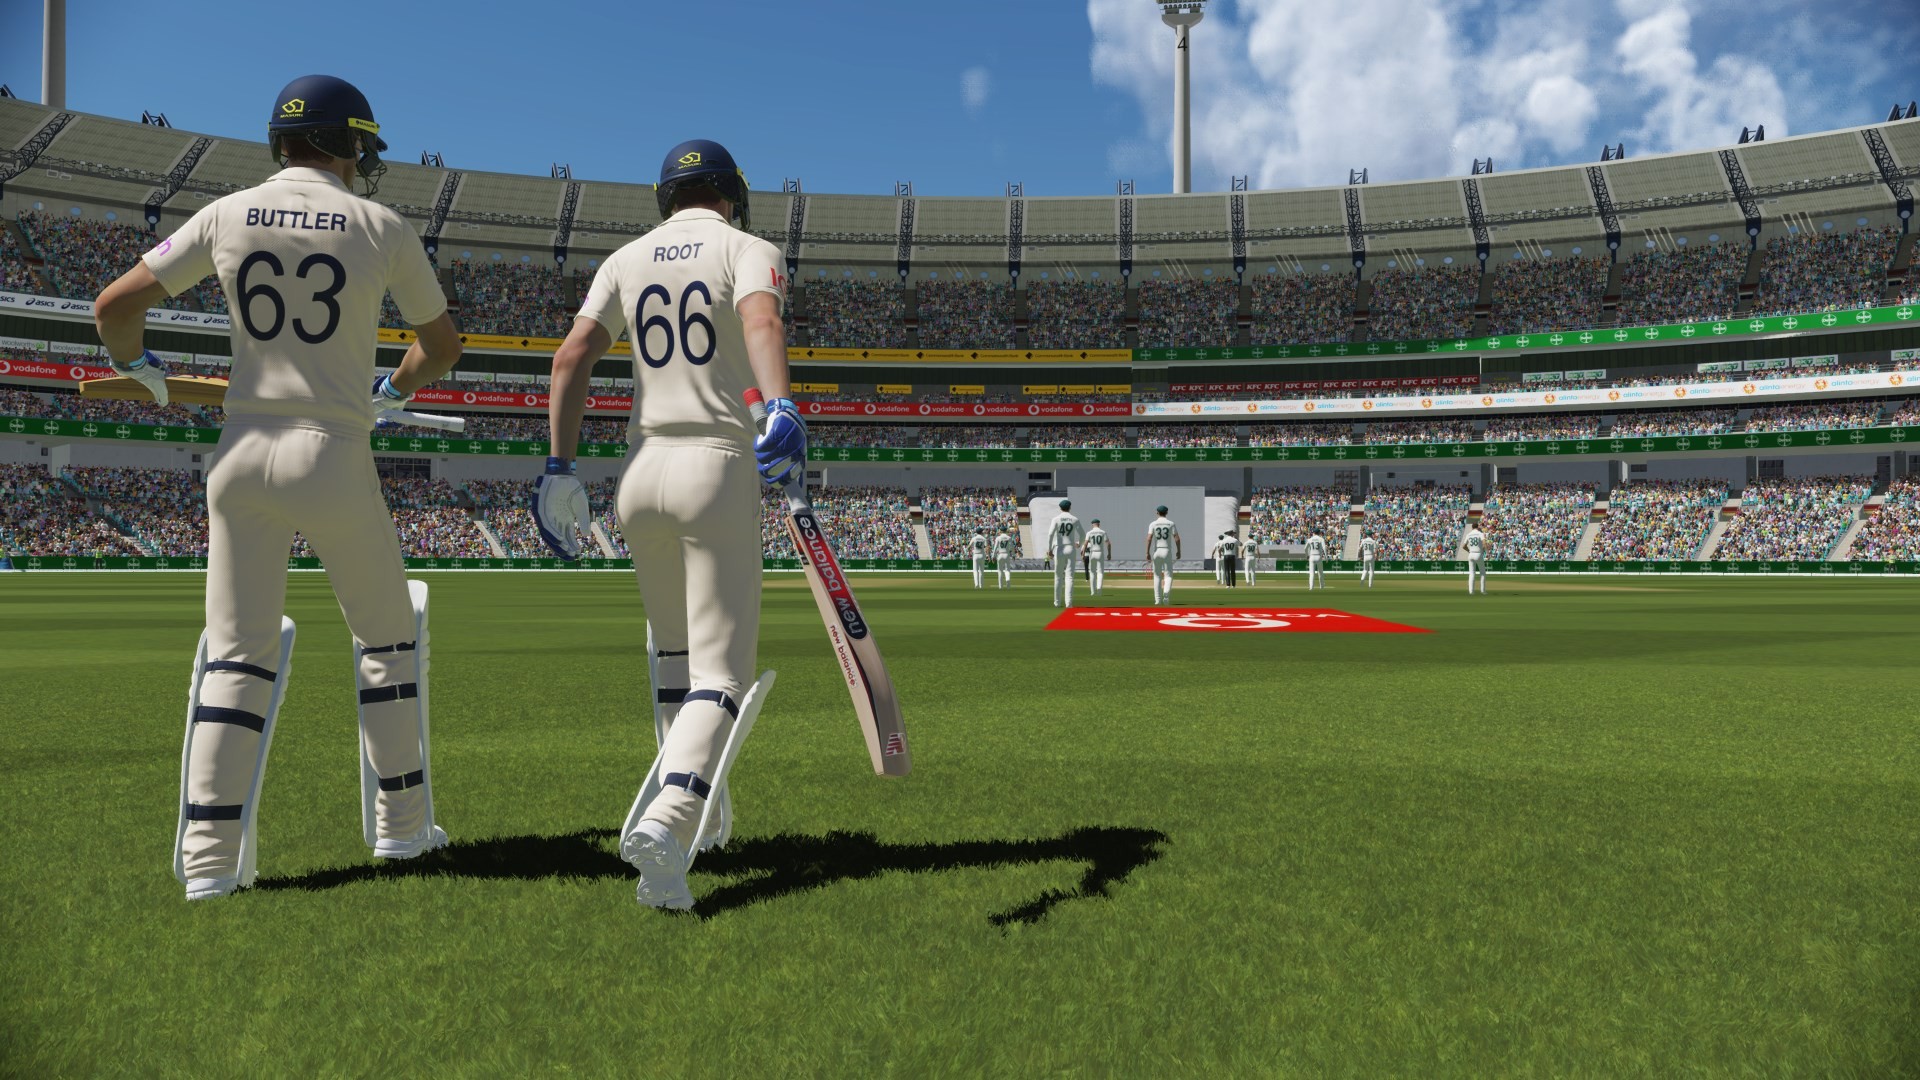 Cricket 22 – November 24 - Optimized for Xbox Series X|S ● Smart Delivery